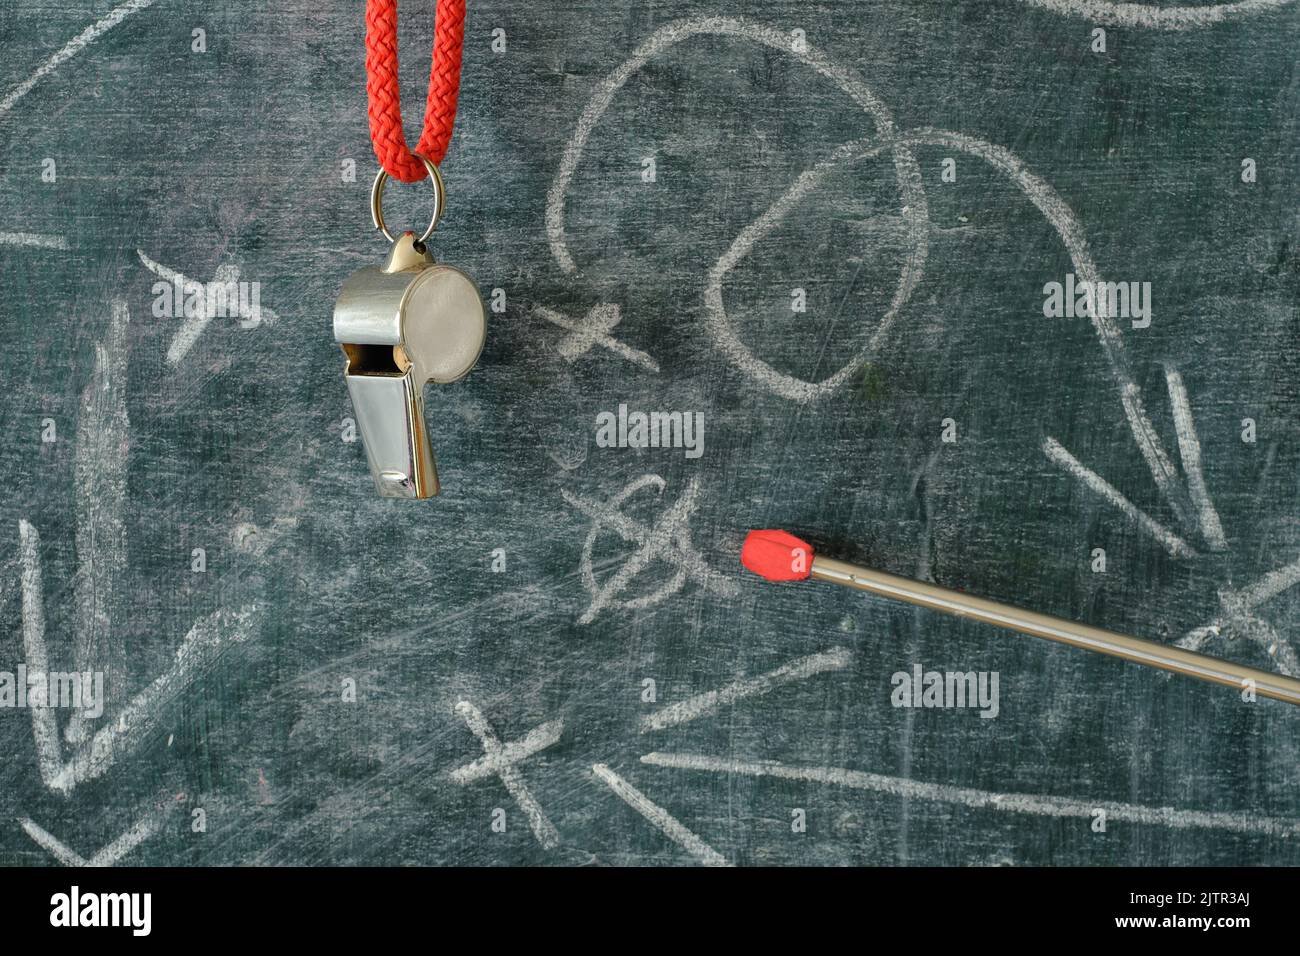 Whistle of soccer coach or referee and soccer tactics scribble on black board. Great soccer event this year. Stock Photo